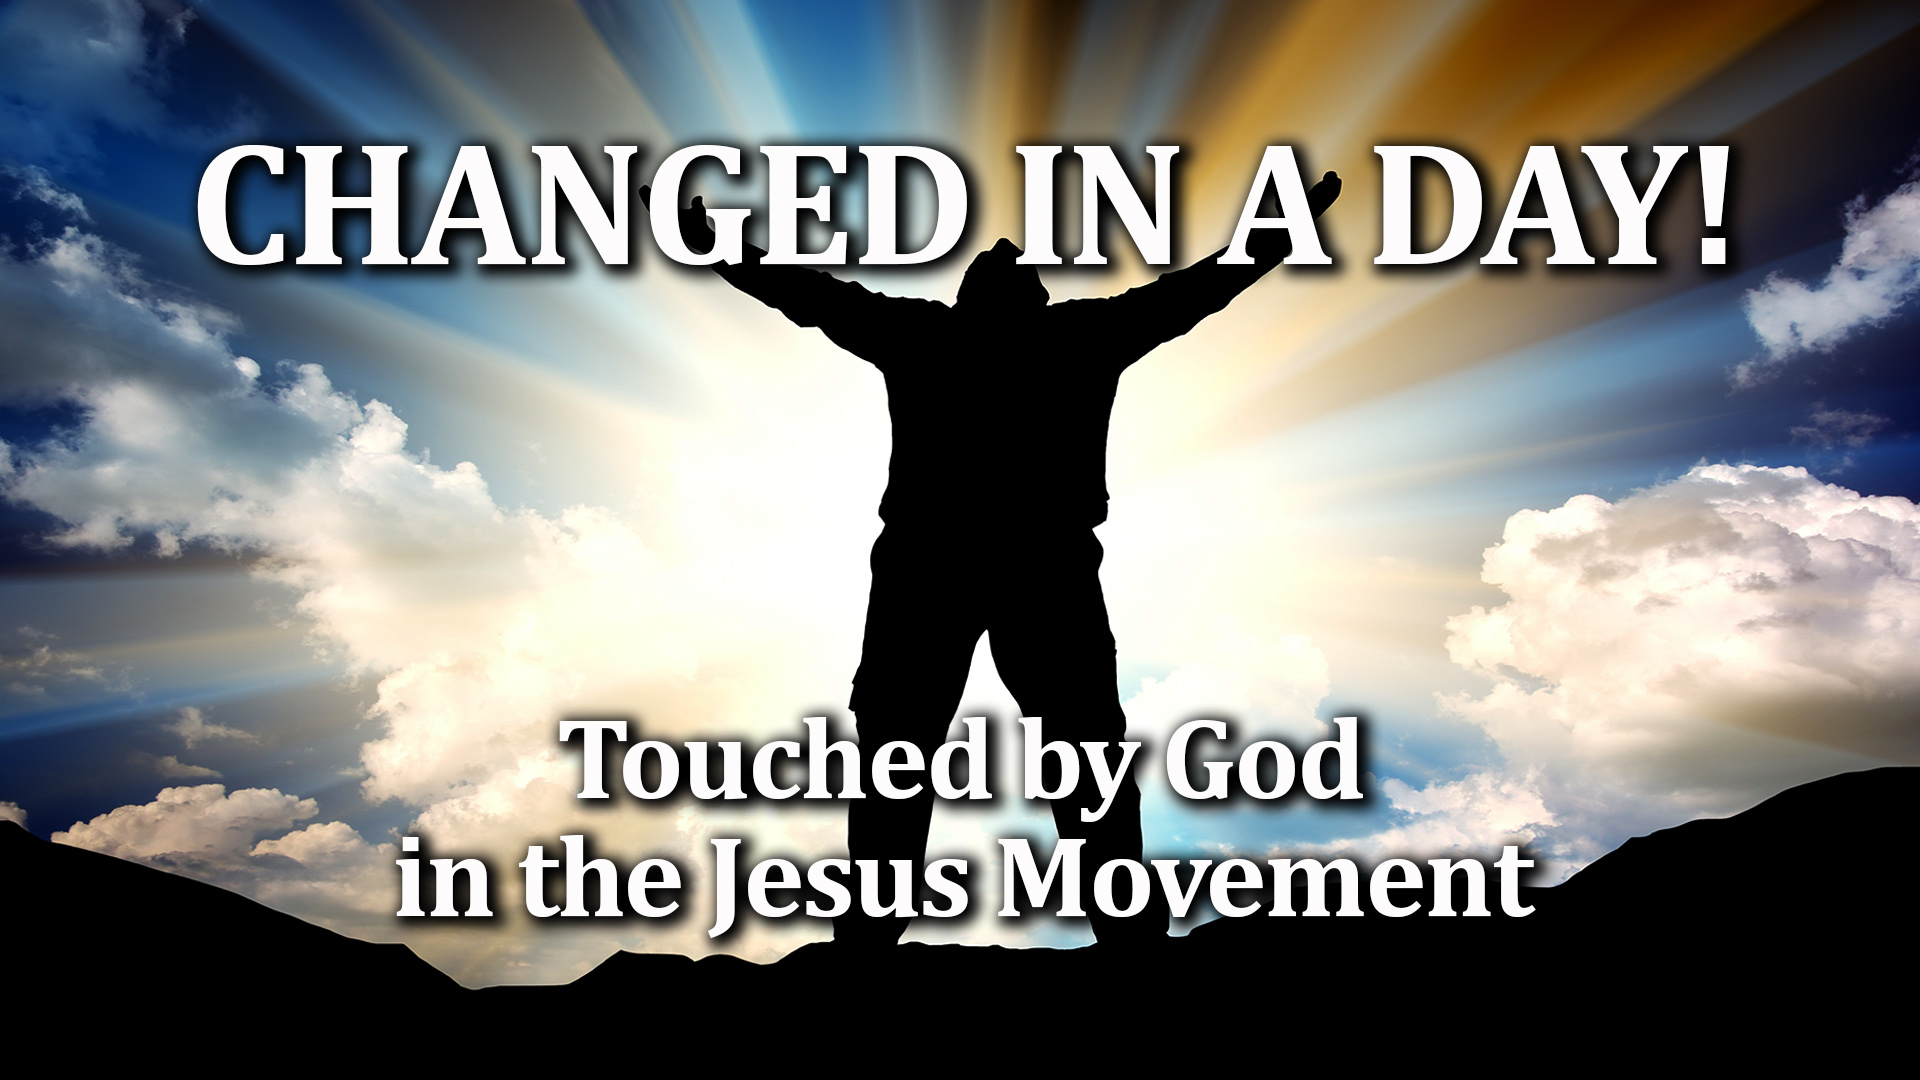 11-30-21 CHANGED IN A DAY touched by God in the Jesus Movement